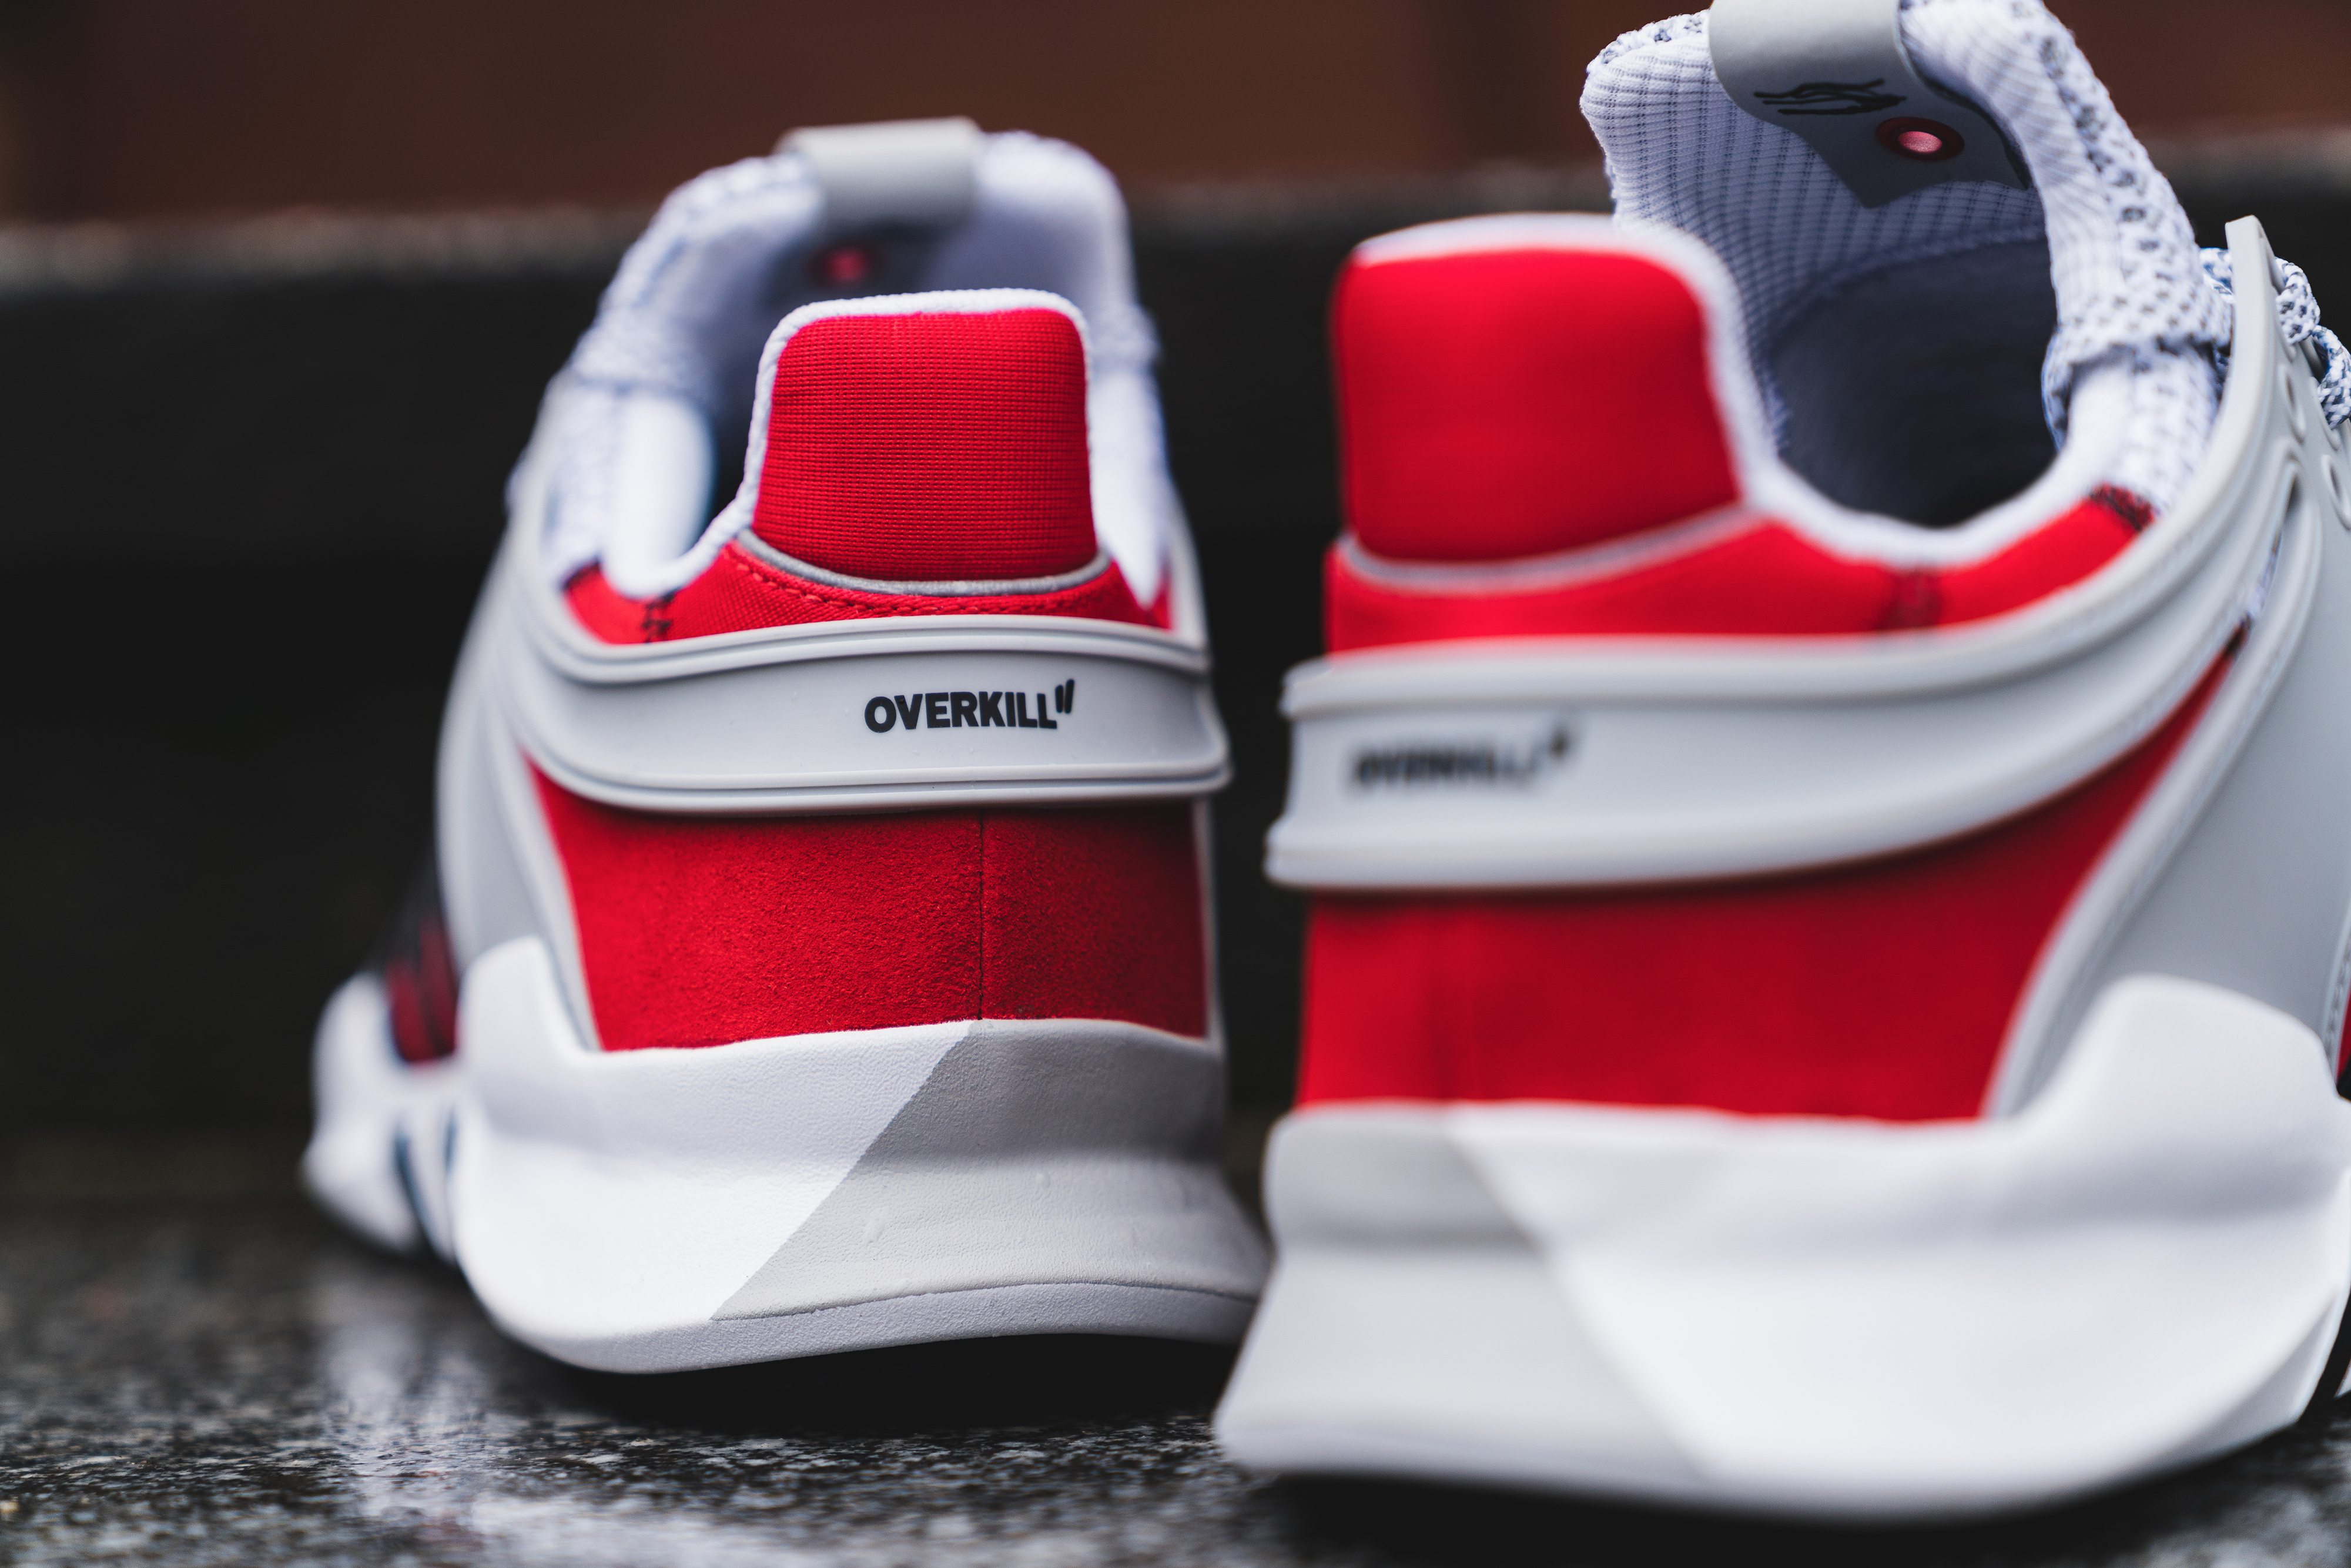 OVERKILL x adidas "Coat of Arms" Pack